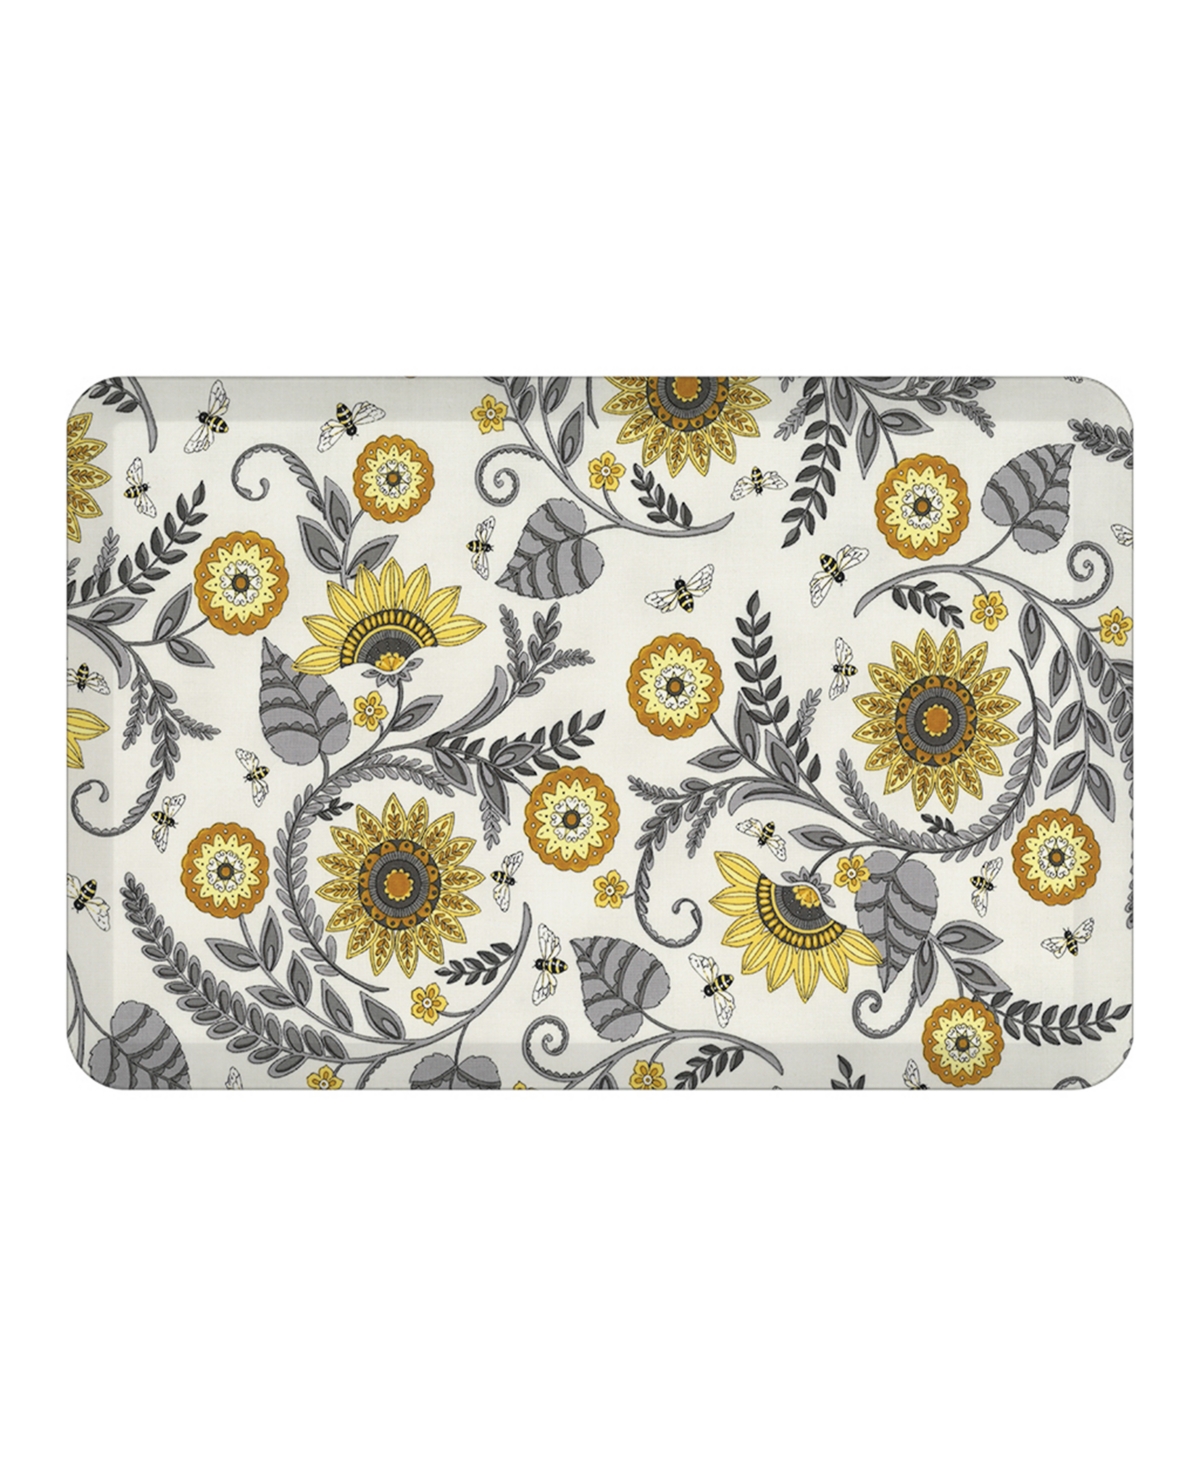 Sophisticated Bees Kitchen Mat, 20" x 30" - Silver-Tone